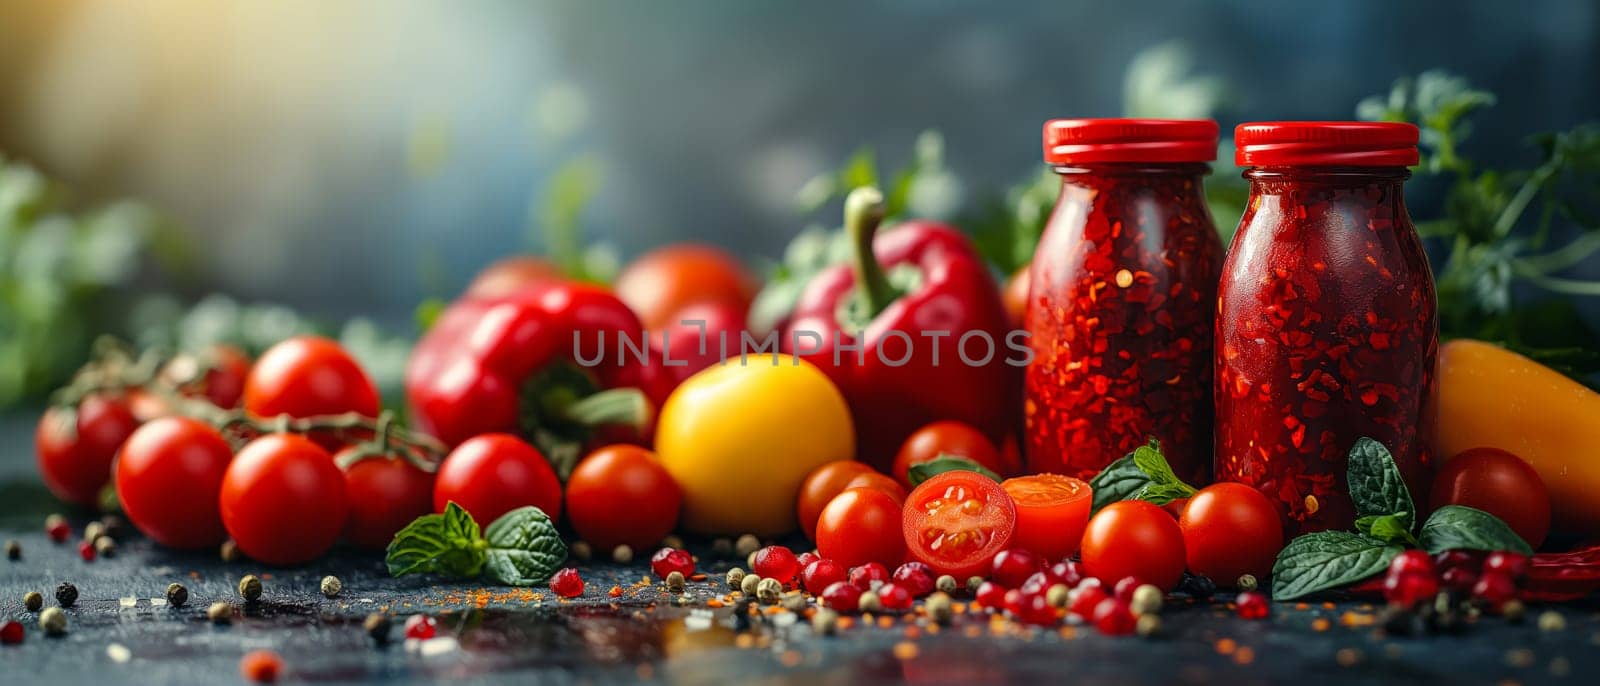 Food background with spices, herbs, sauces and vegetables on a vintage background by Fischeron